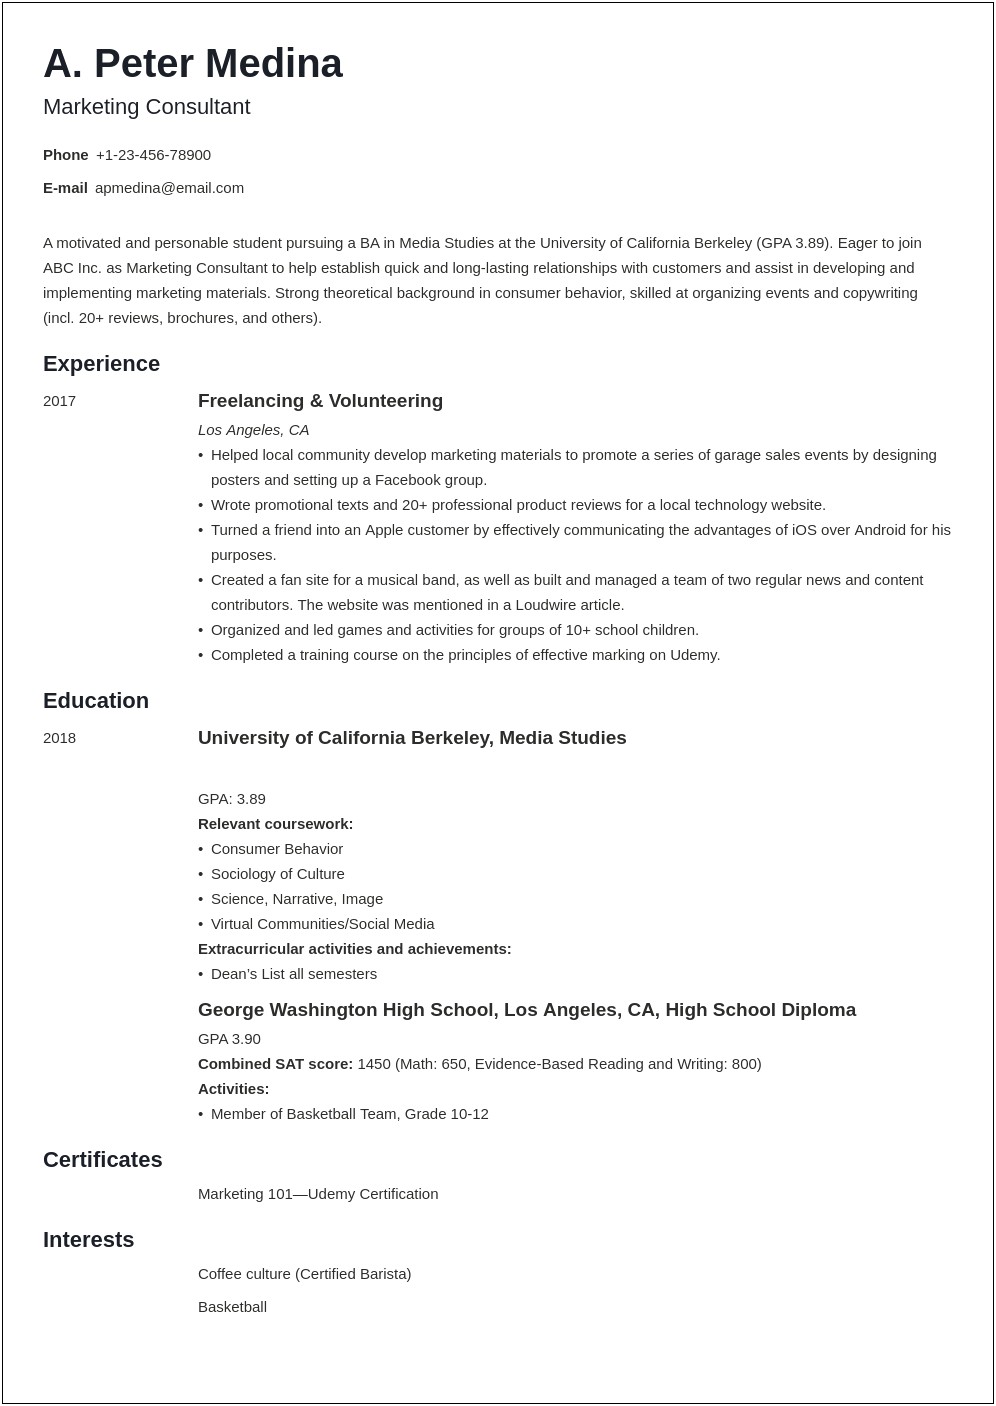 Resume Exapmles With Limited Work Experience